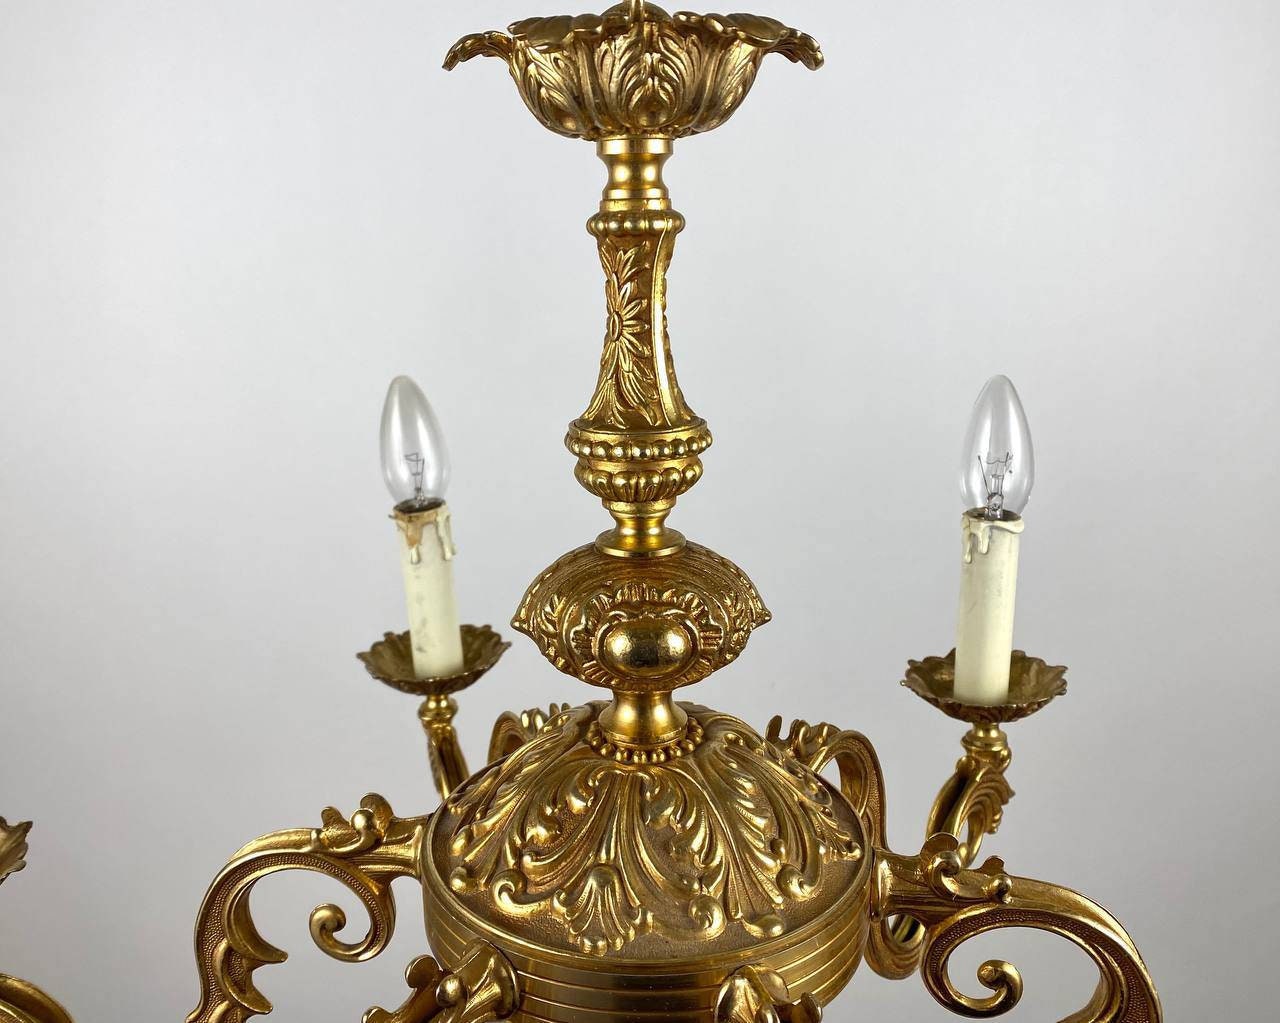 Attractive Gilt Brass Chandelier 6-arm French Ceiling Lamp Vintage